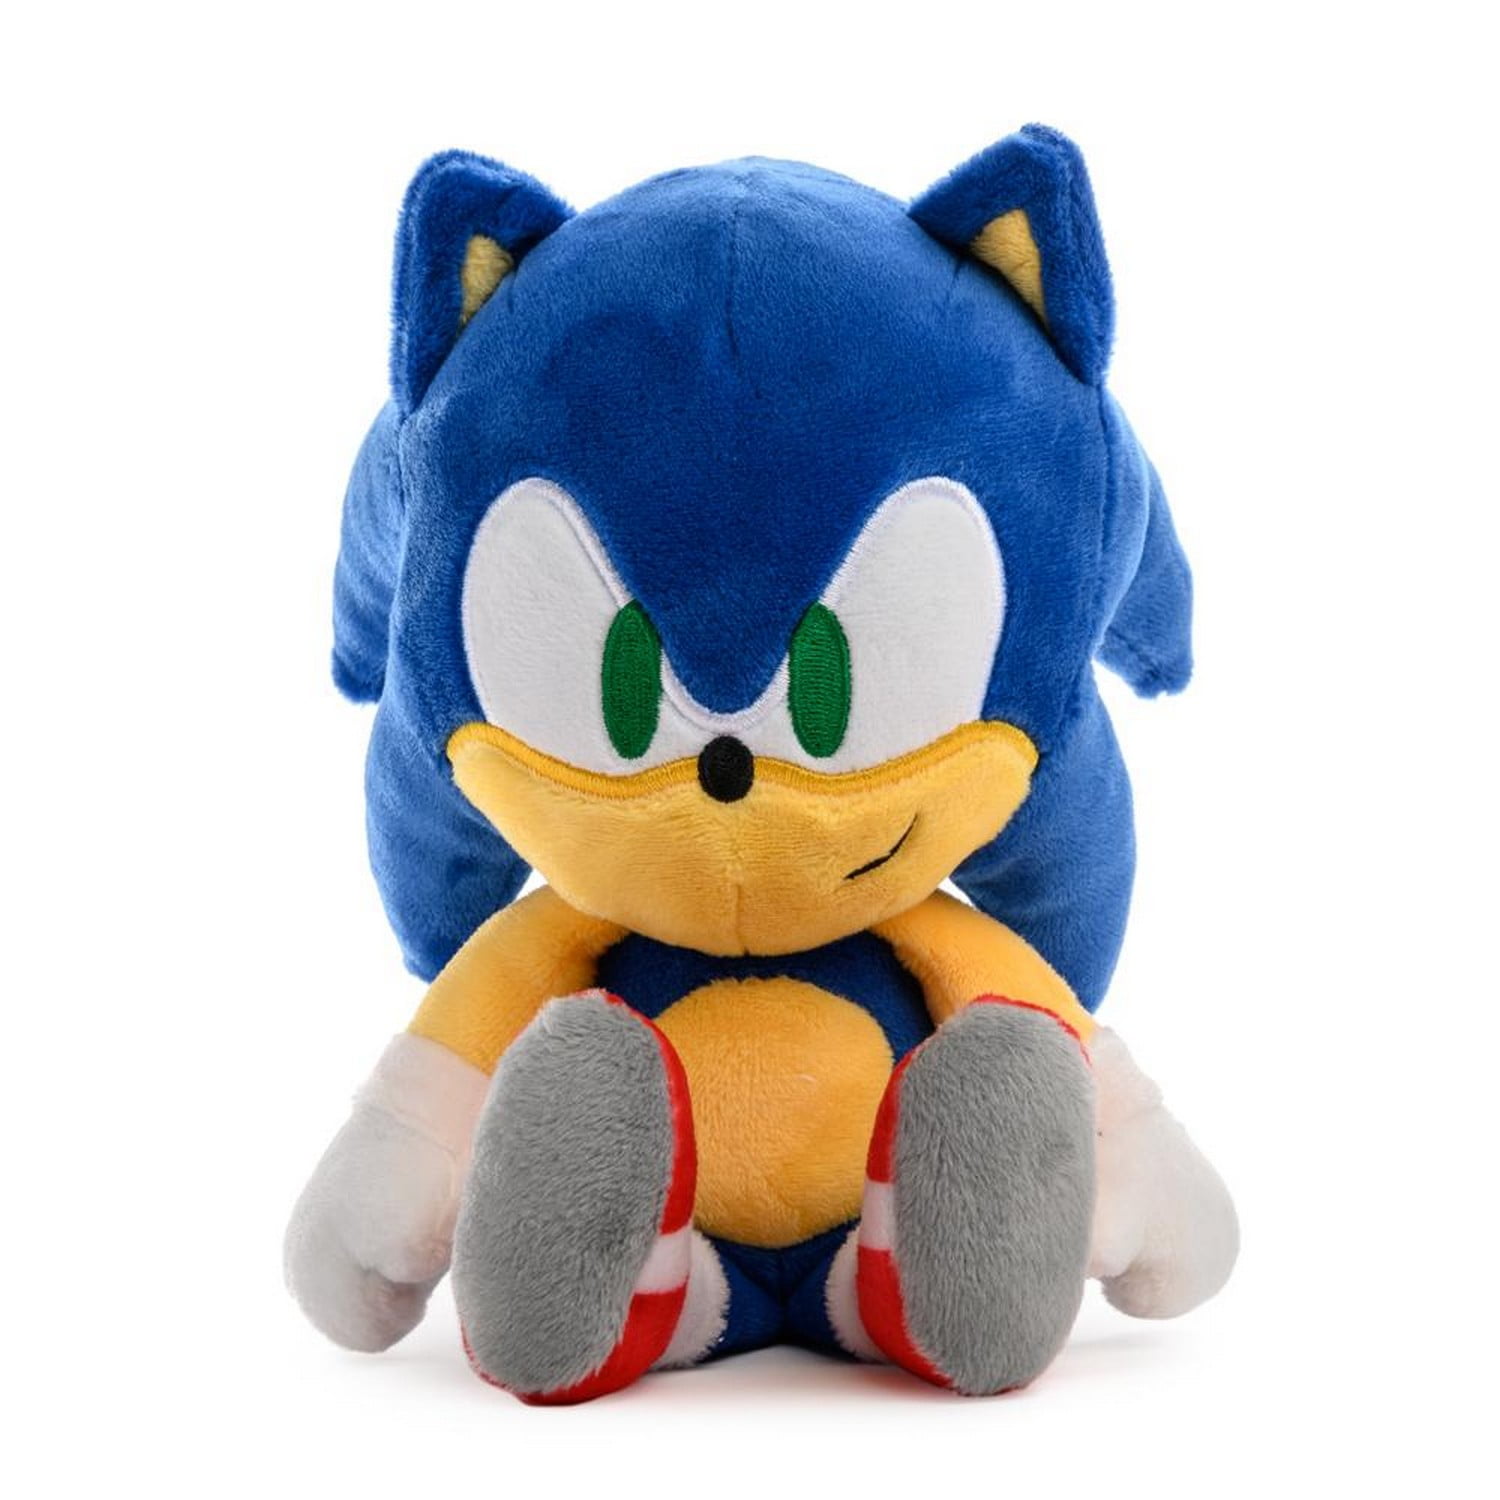 Sonic the Hedgehog Knuckles Plush Toy Soft Stuffed Anime Doll 8 Inch Kids Gift 